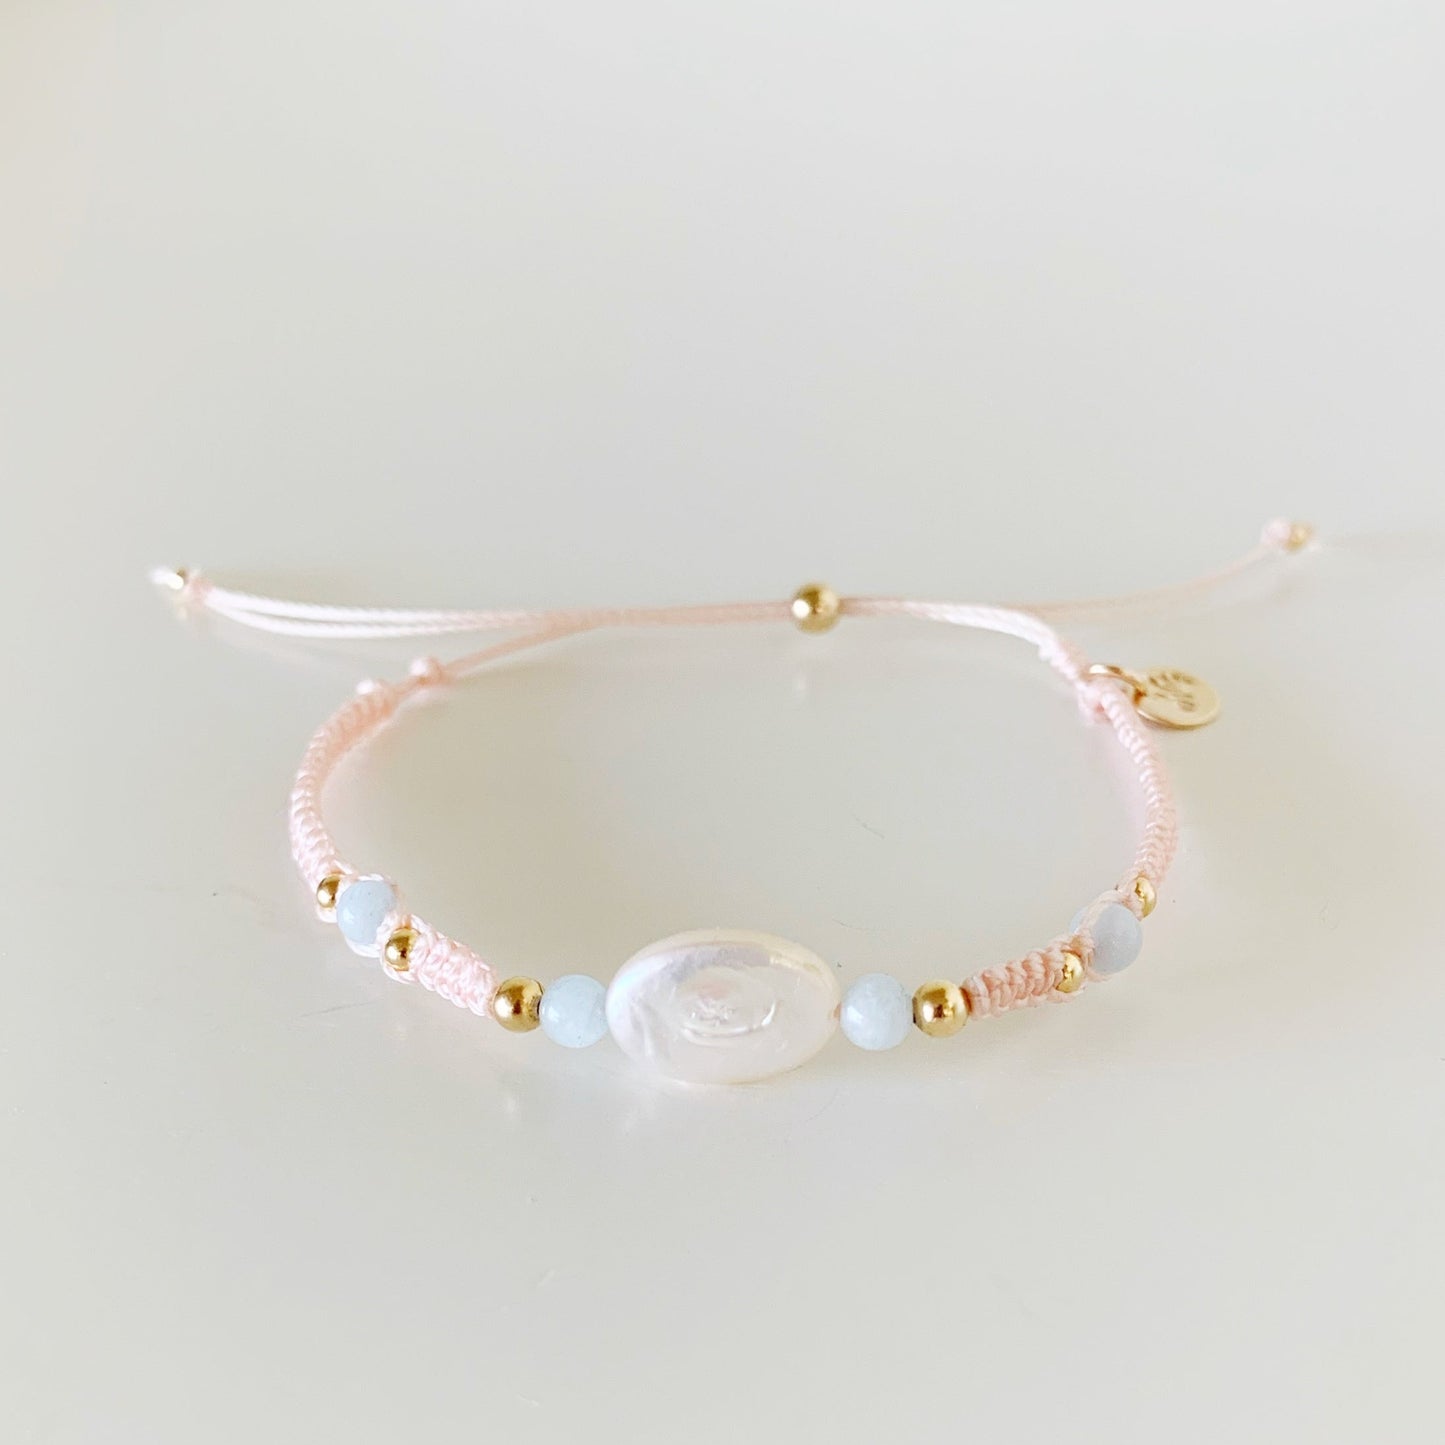 the happy as a clam bracelet by mermaids and madeleines is an adjustable macrame style bracelet designed with a pastel blush color cord with a freshwater oval pearl at the center with 4mm aquamarine beads on eiither side. this bracelet is photographed from the front on a white surface